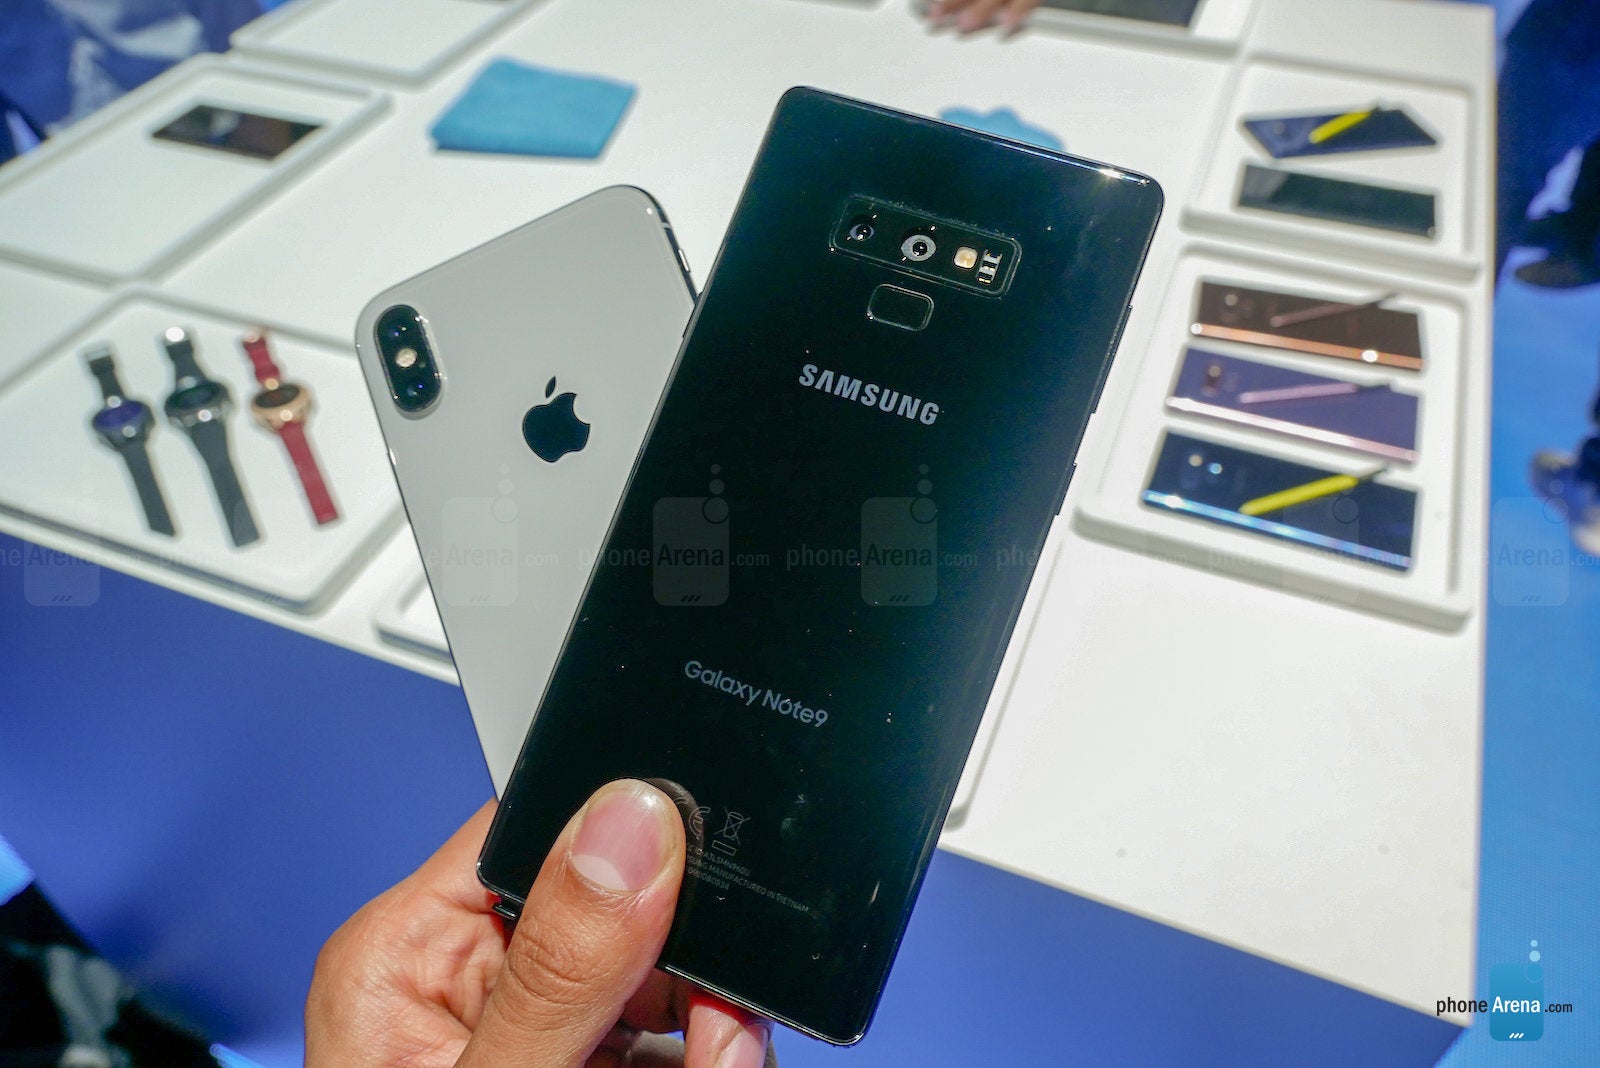 Galaxy Note 9 vs. iPhone X: Battle of the $1000 flagships